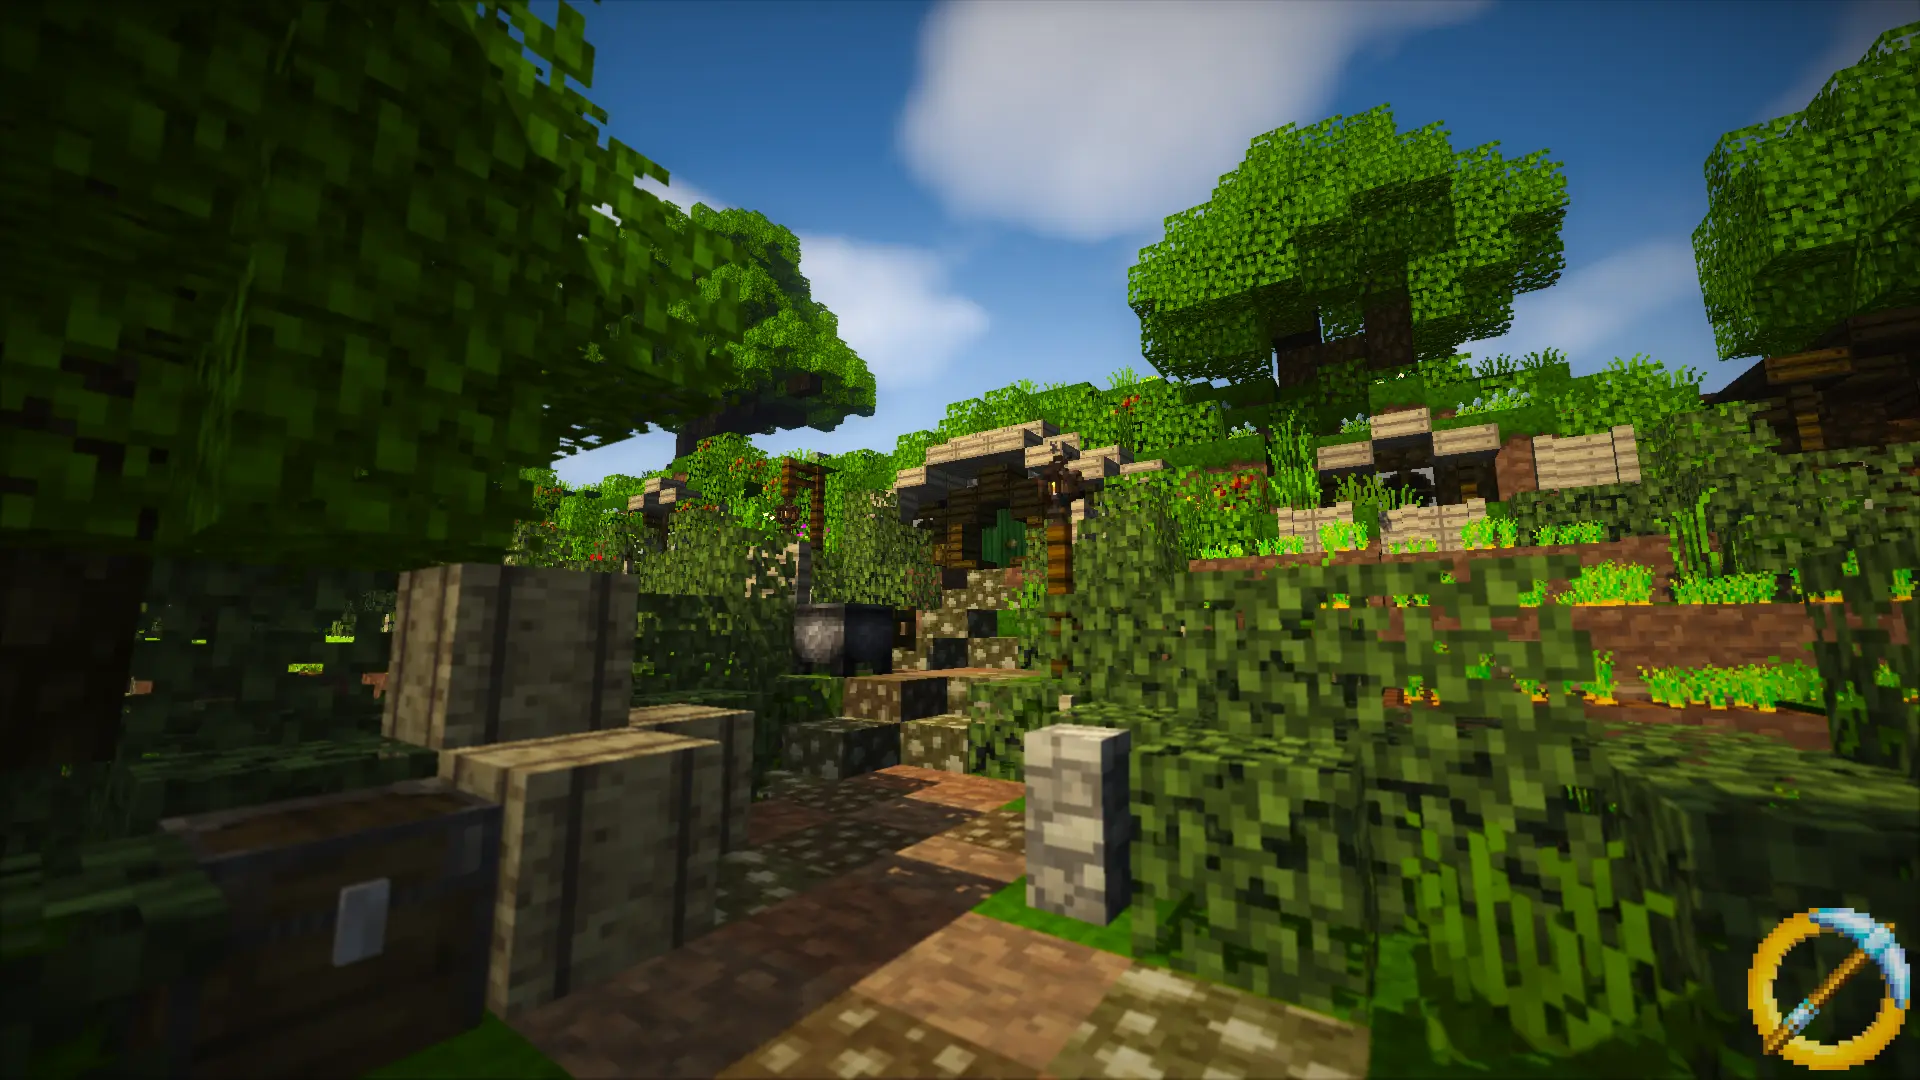 Bag End Minecraft Middle Earth